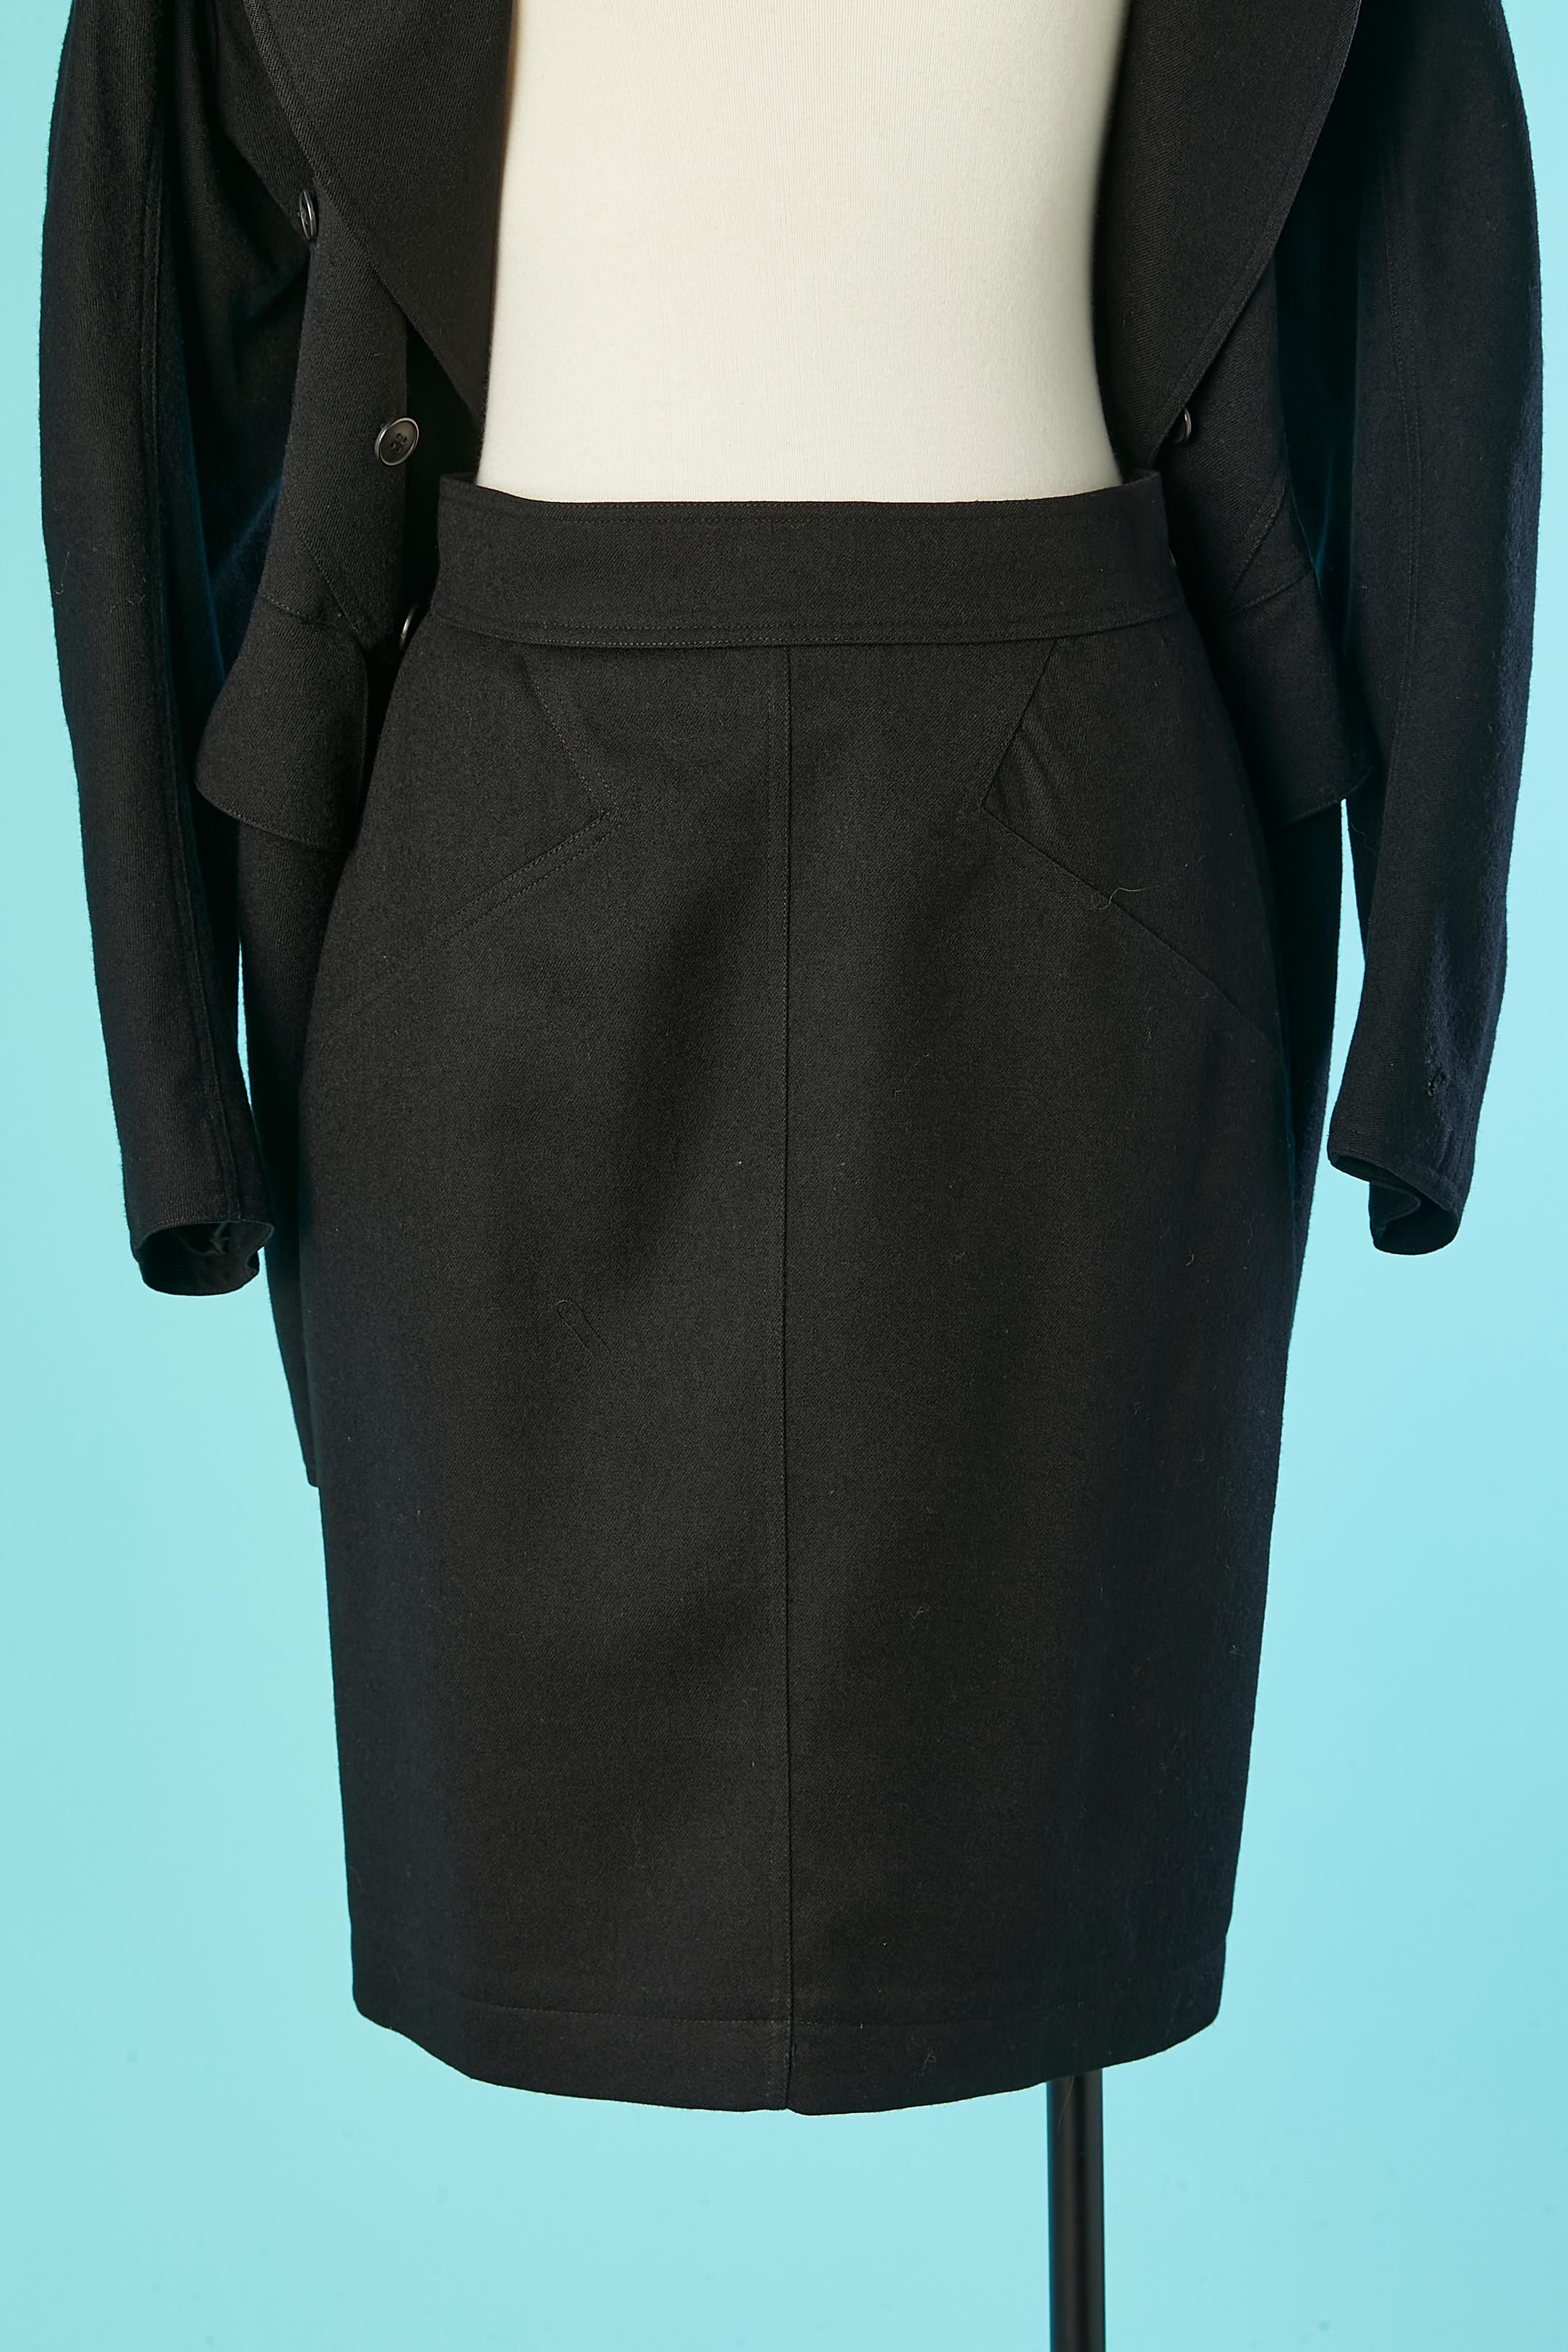 Black wool double breasted skirt suit with cut-work and raglan sleeves Alaia  For Sale 3